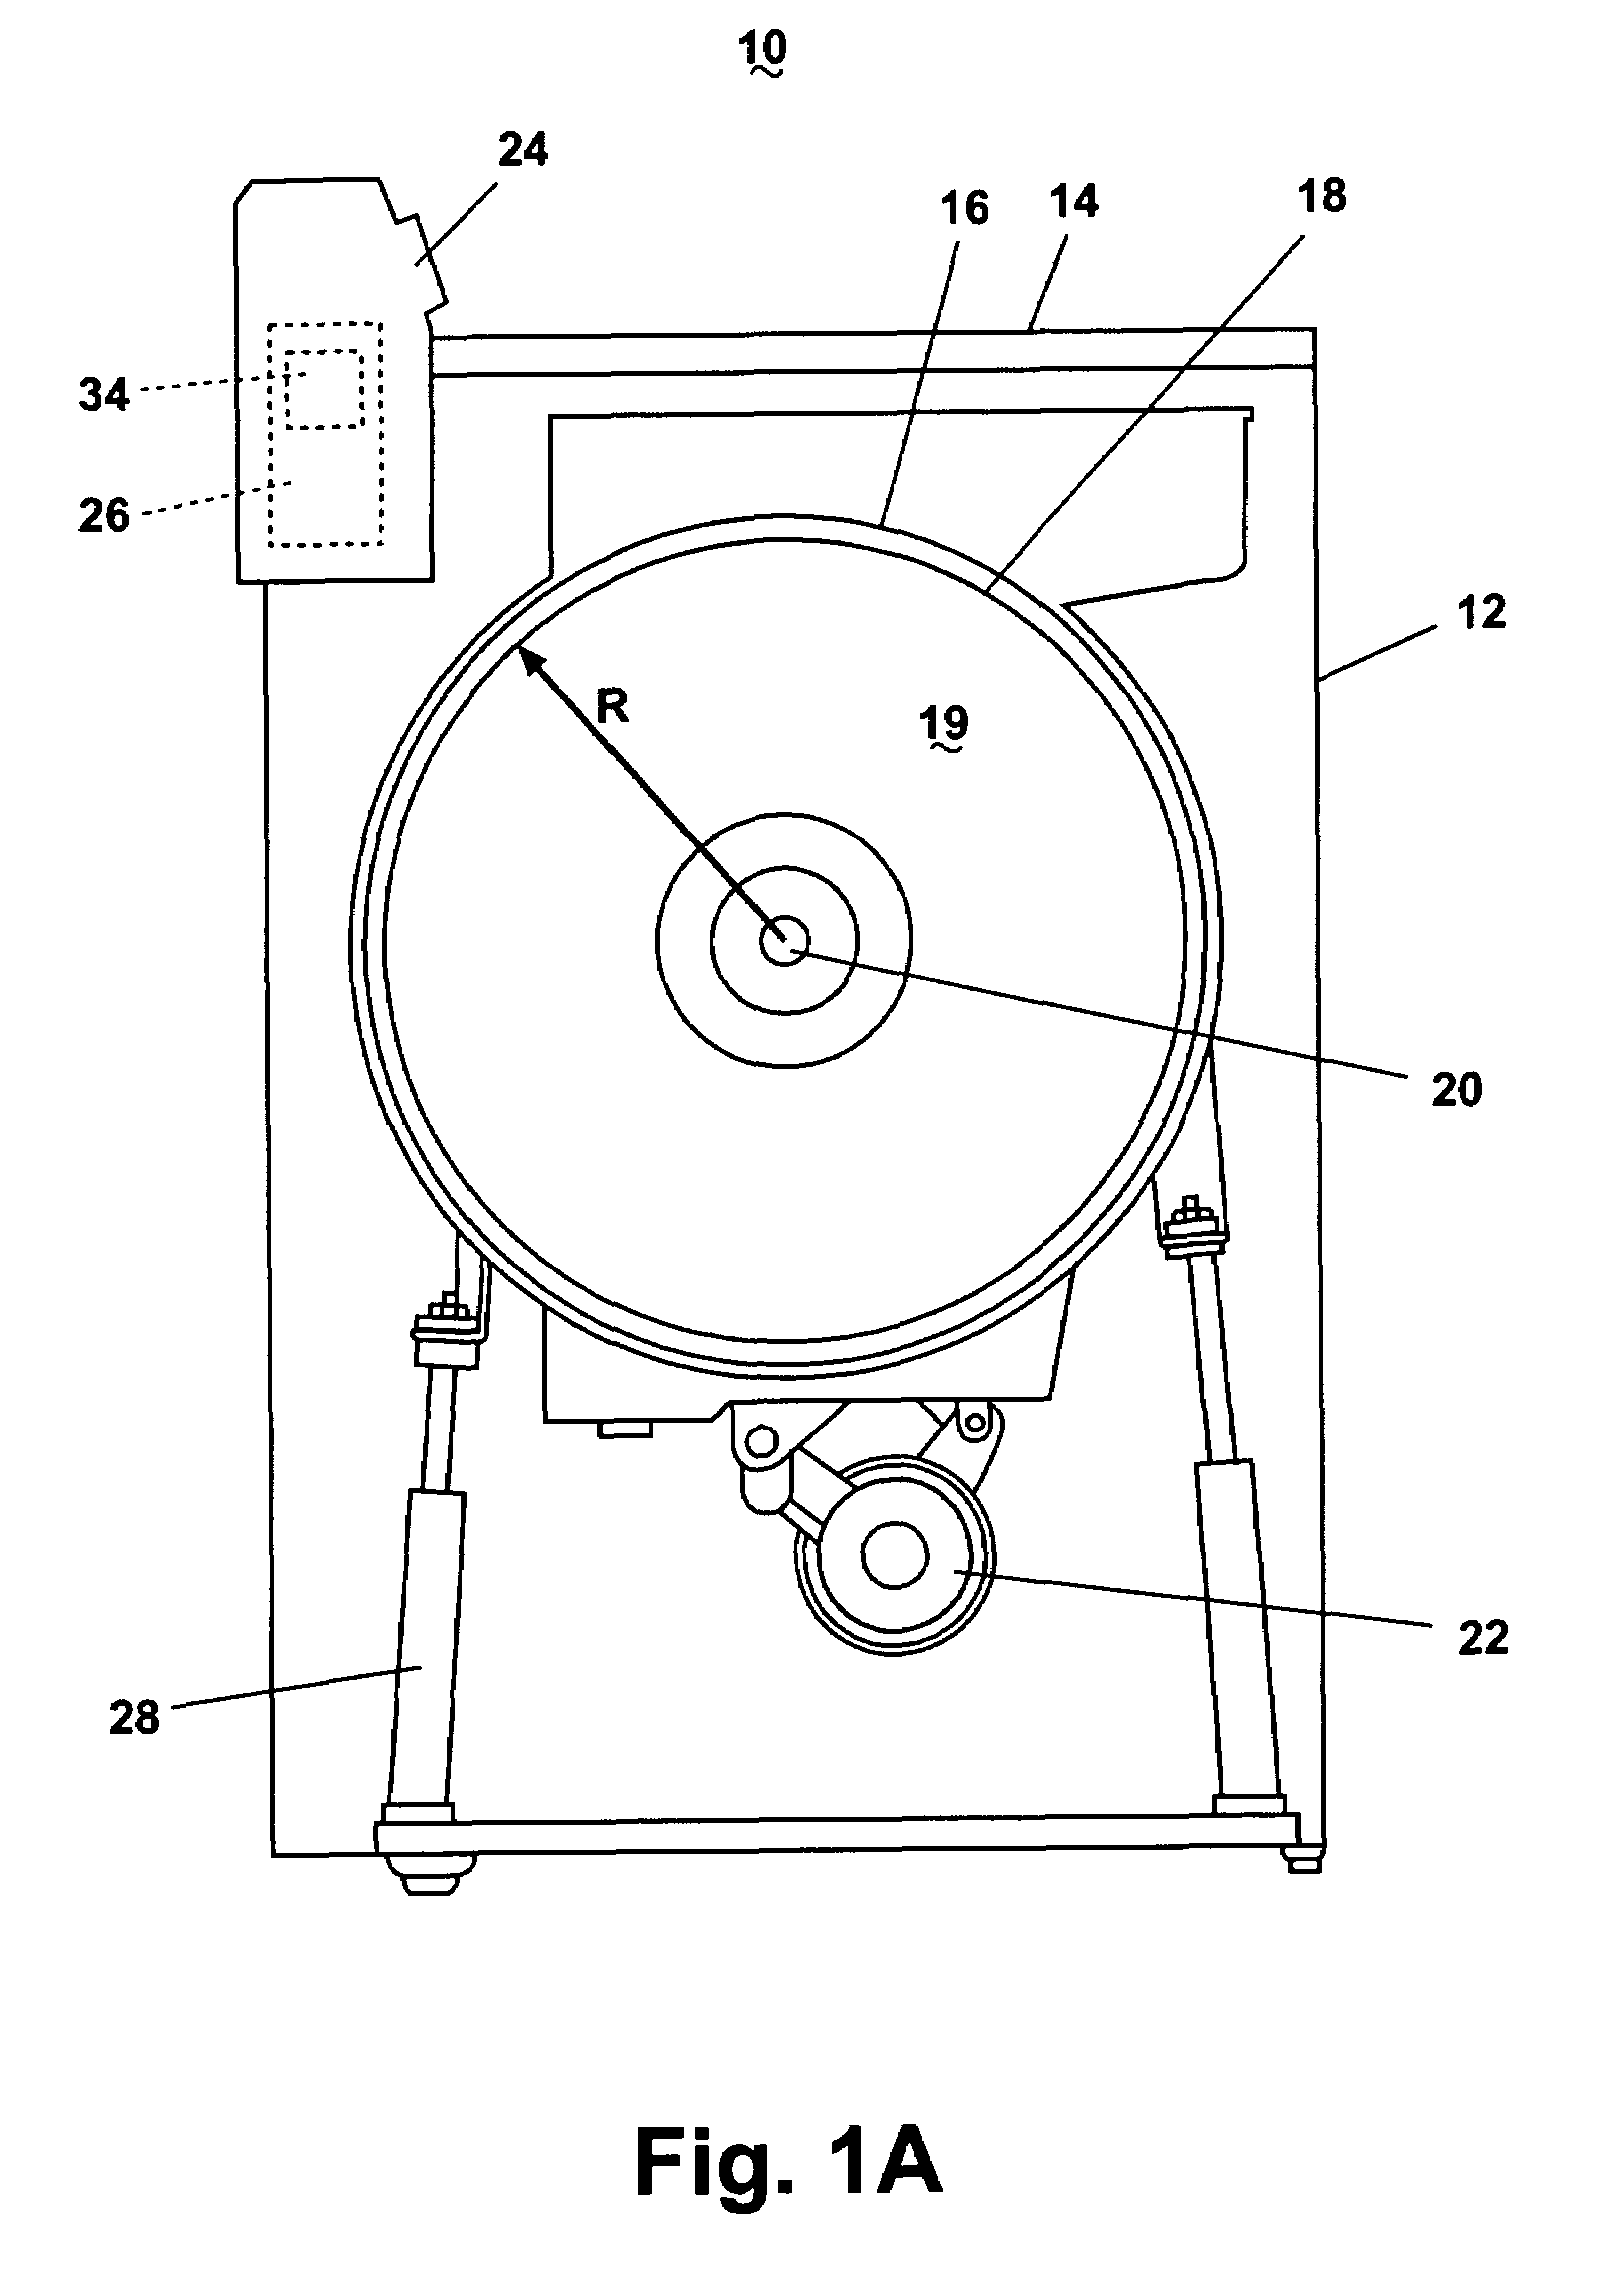 Method for controlling a spin cycle in a washing machine